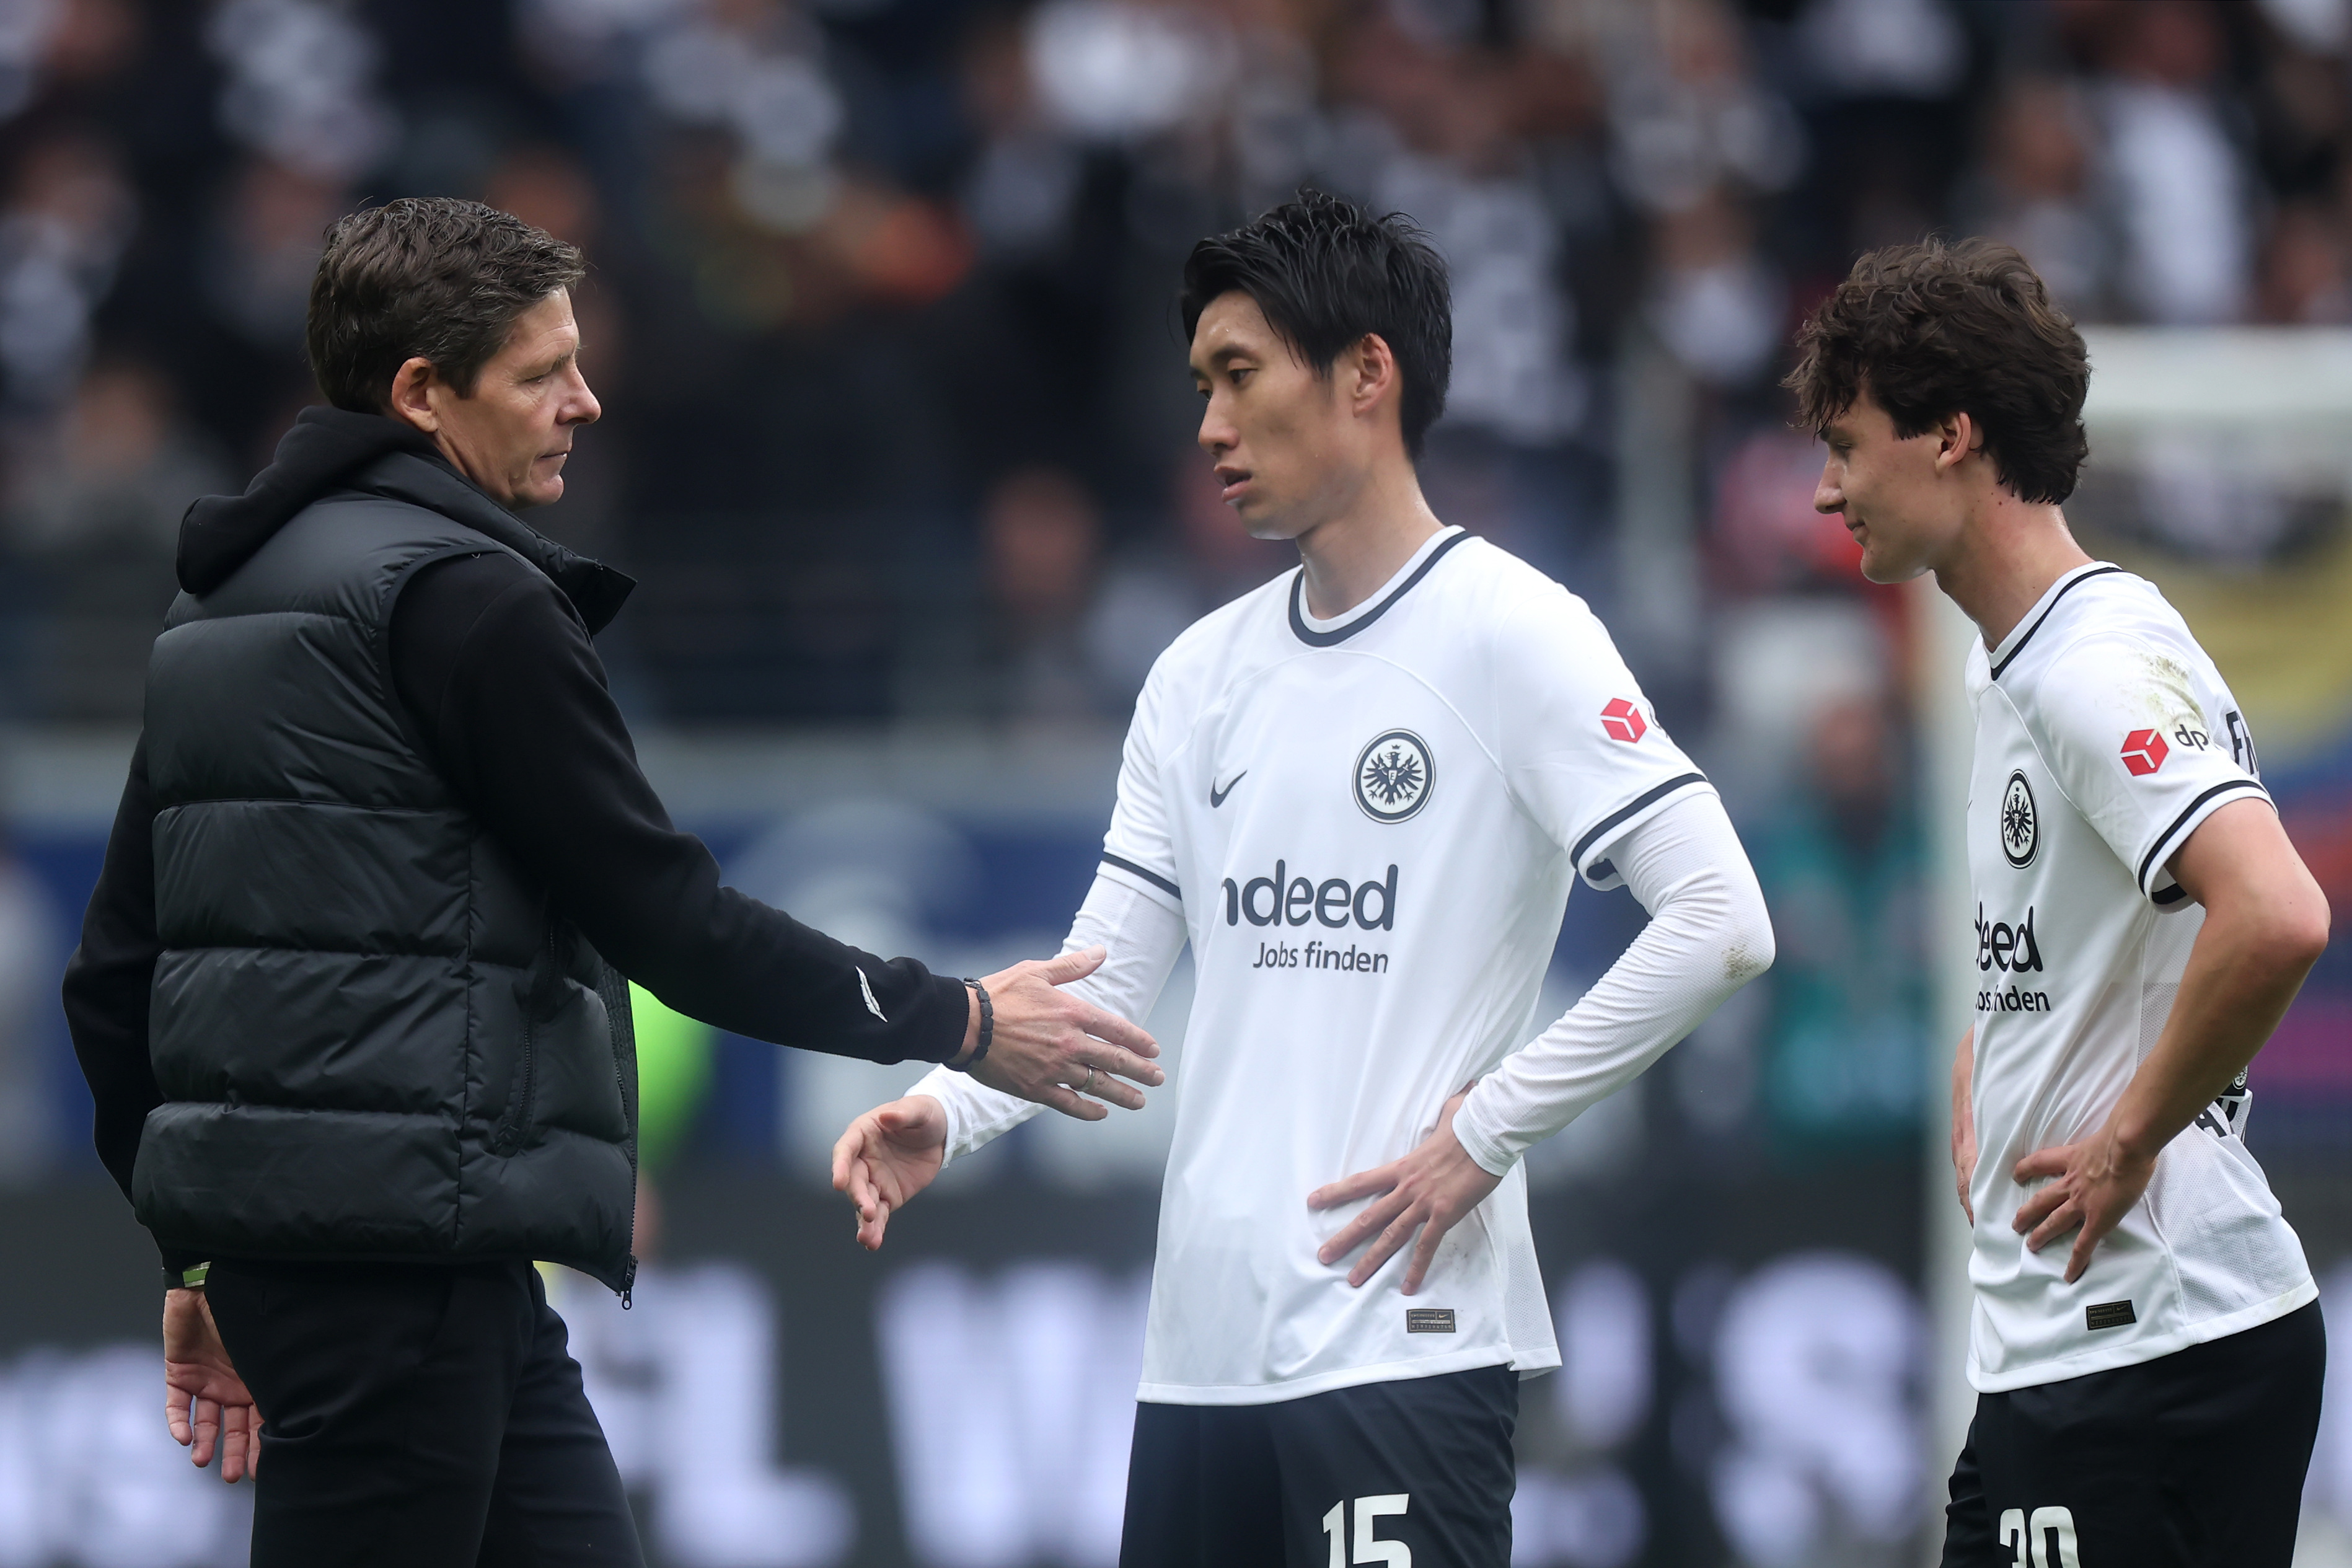 Crystal Palace lining up a move for midfielder who previously played under Oliver Glasner at Frankfurt